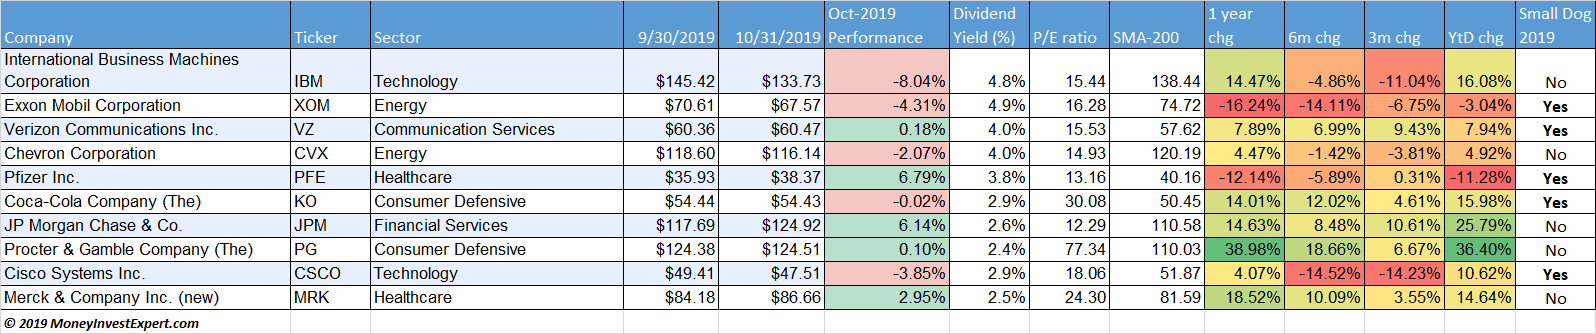 dogs of the dow performance october 2019